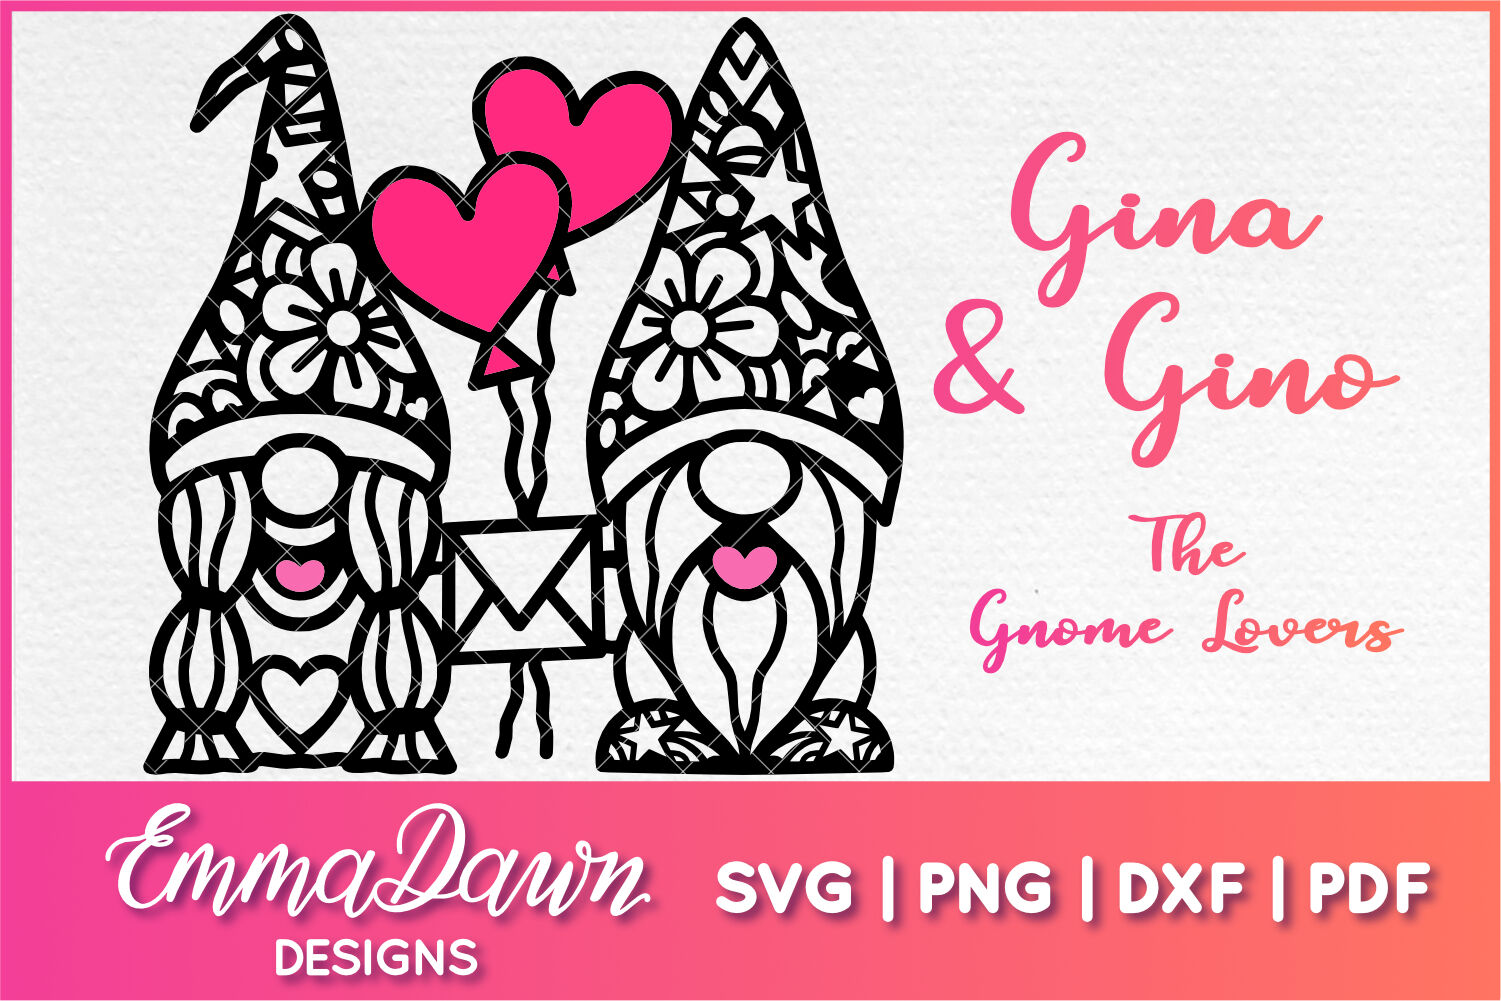 Download Gina Gino The Gnome Lovers Svg Mandal Zentangle Design By Emma Dawn Designs Thehungryjpeg Com